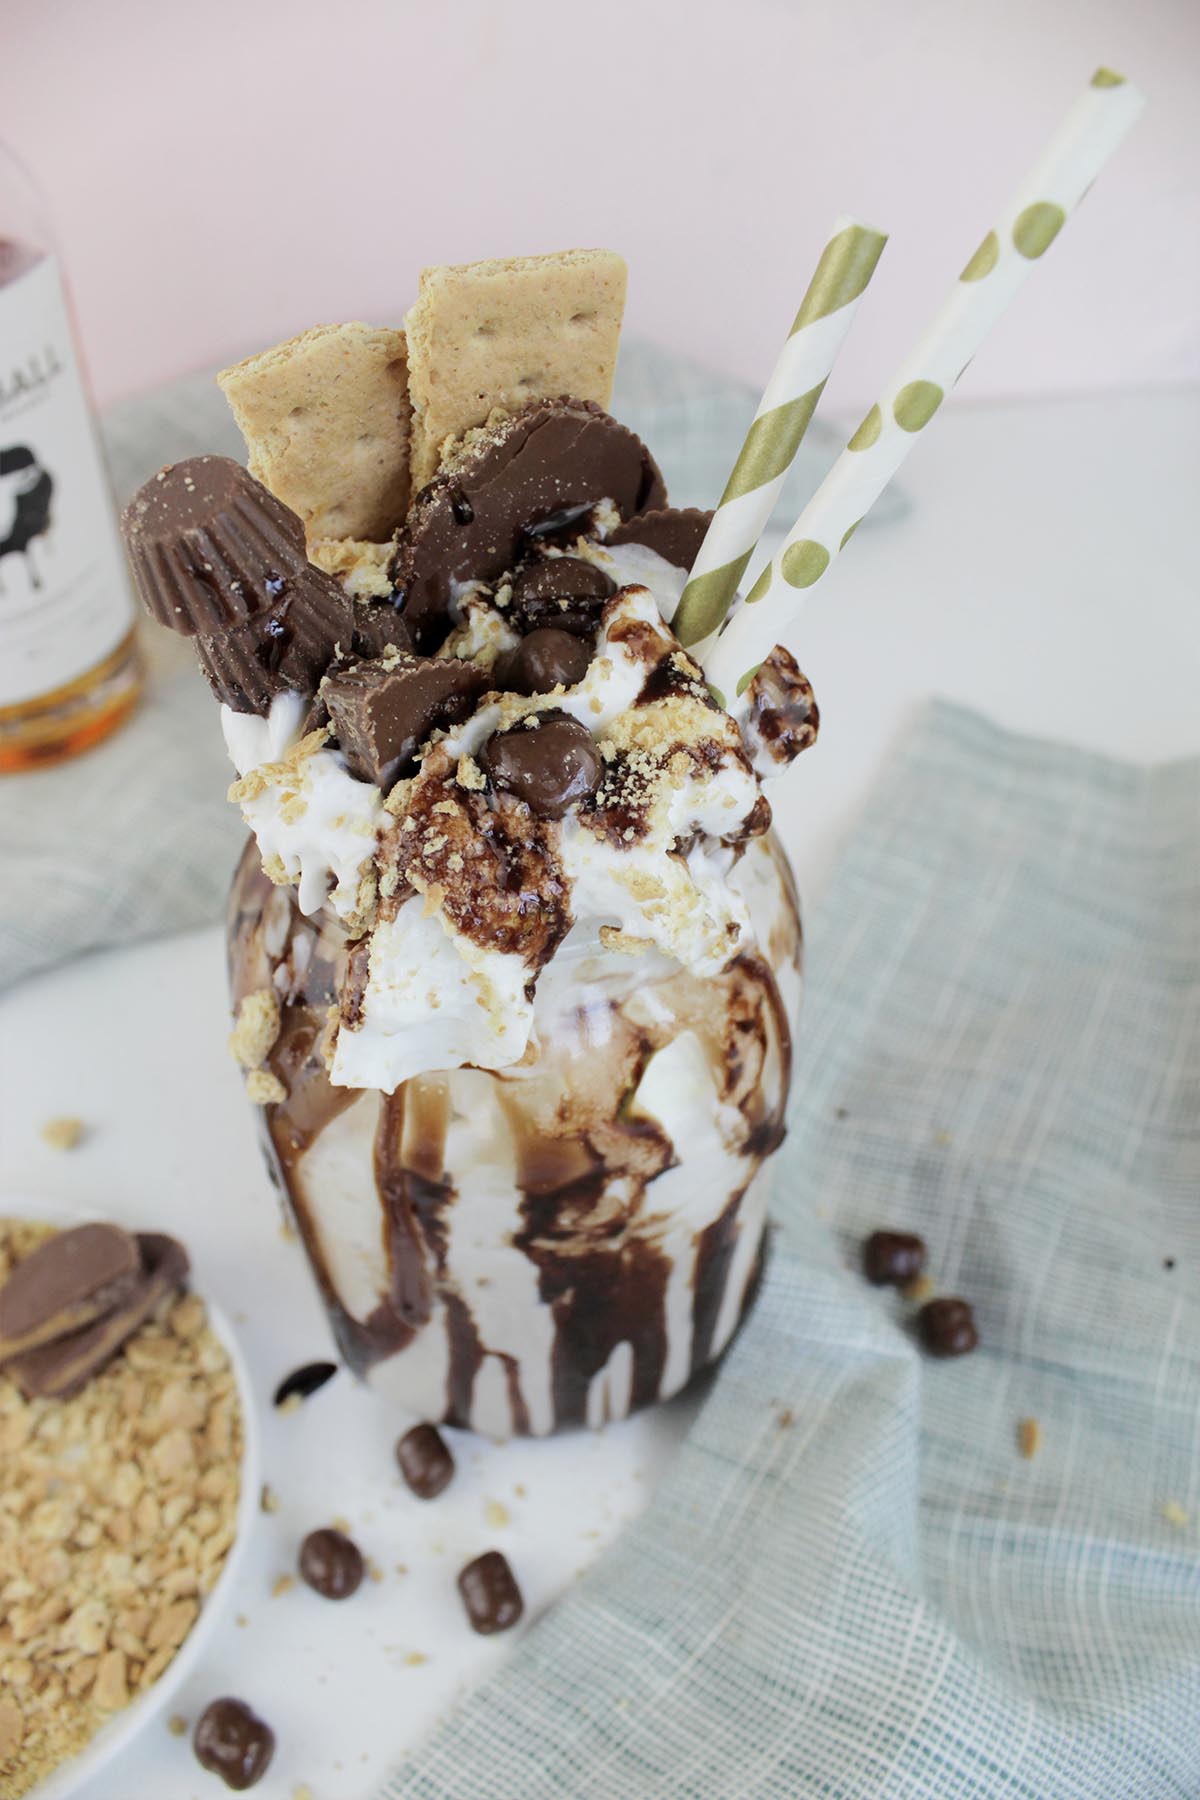 peanut butter whiskey milkshake with crazy toppings.